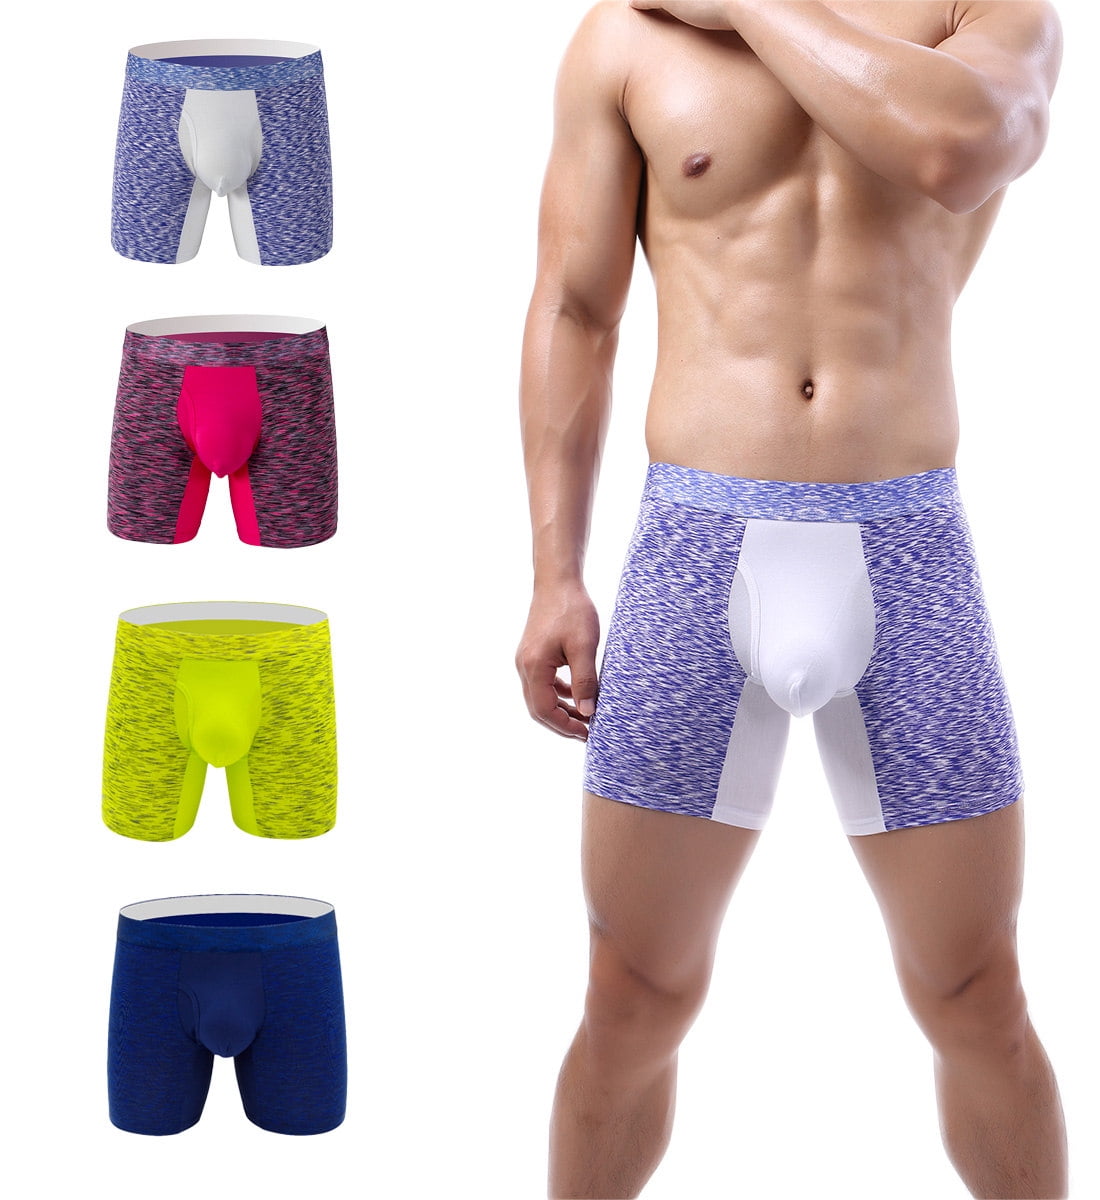 smaconsum Men's Boxer Briefs Tagless Briefs with Pouch No Ride Up 3-Pack/M